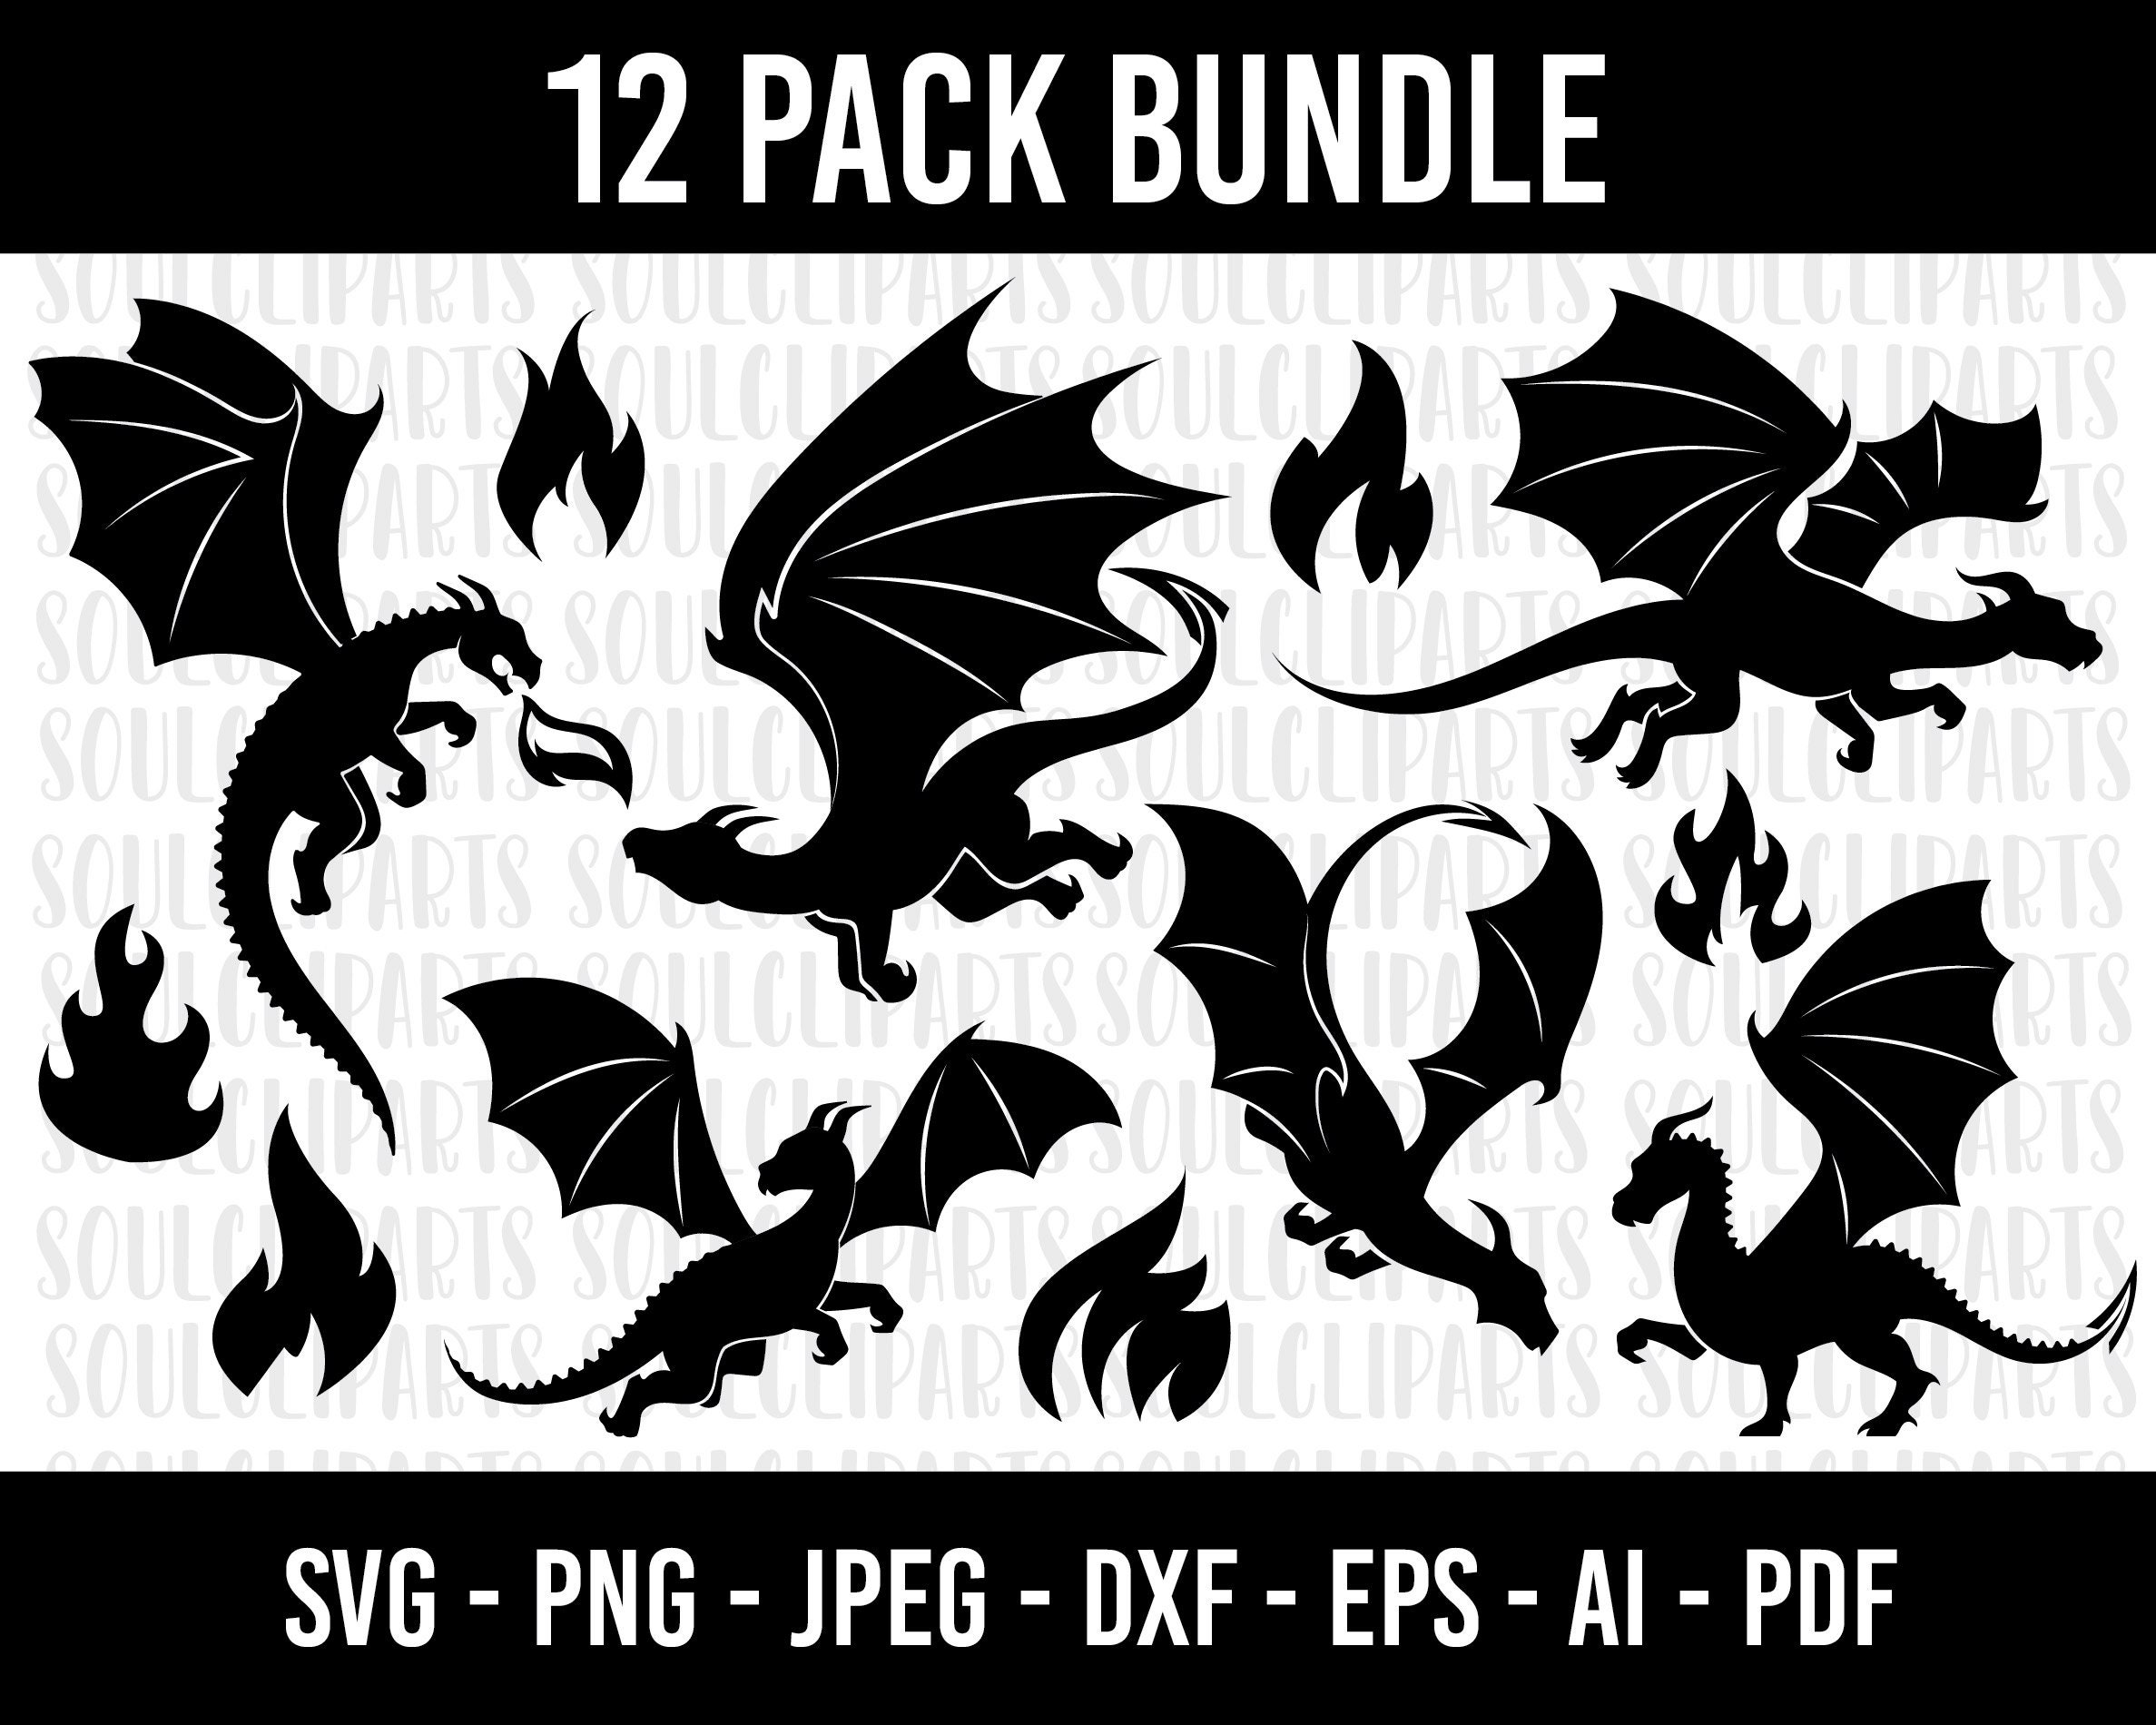 Dragon Ball Z Svg, Dxf, Eps, Png, Clipart, Silhouette and Cutfiles #1